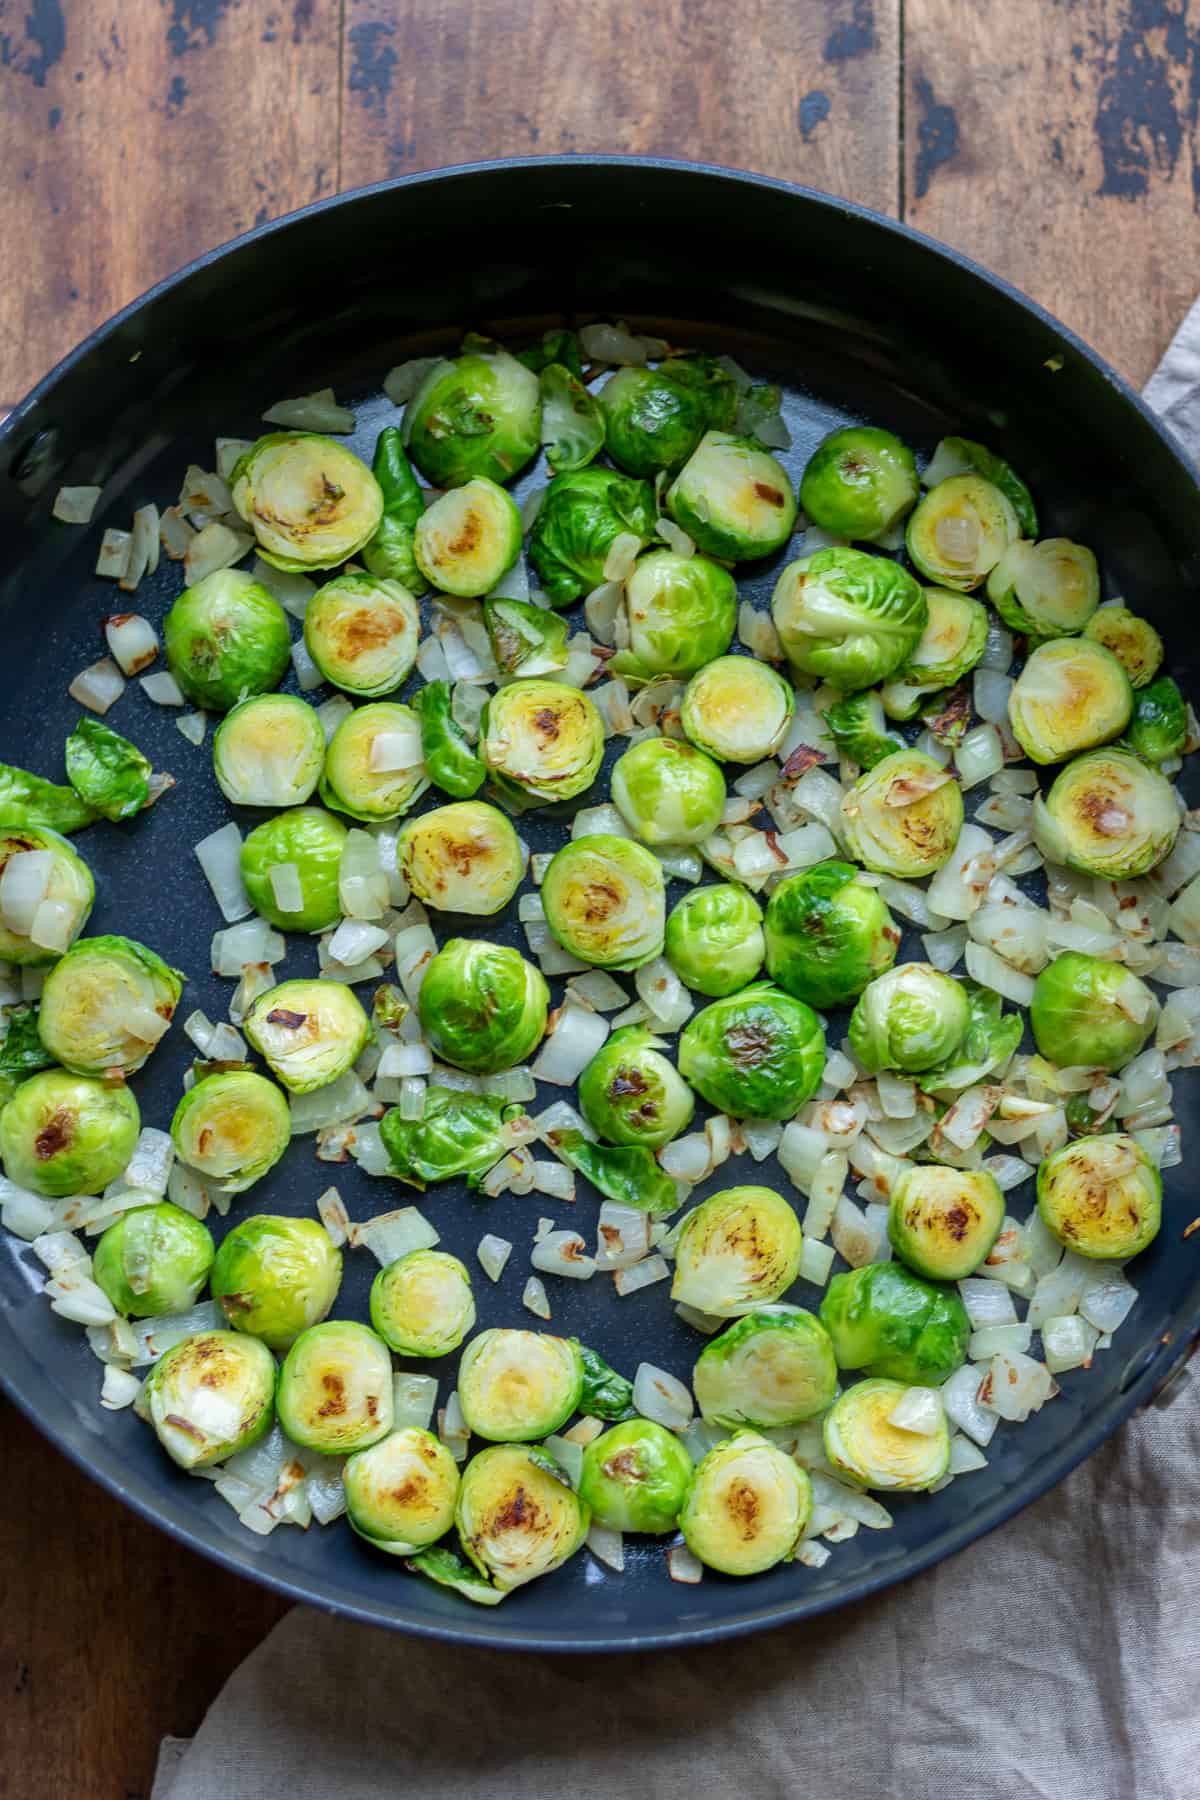 Frying the Brussels sprouts in a pan.